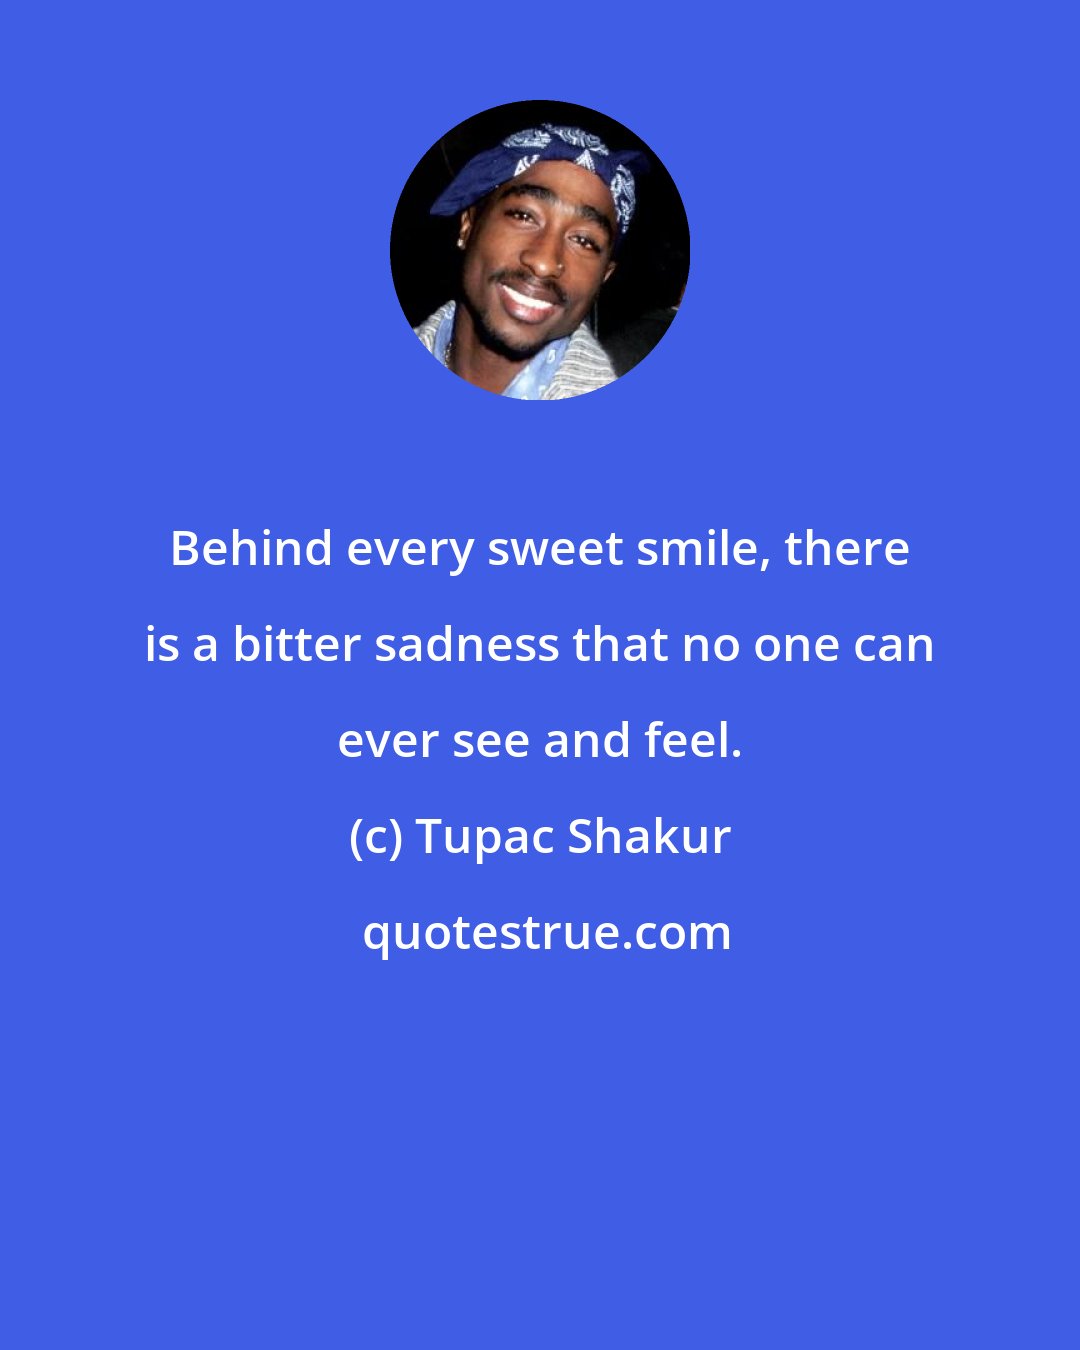 Tupac Shakur: Behind every sweet smile, there is a bitter sadness that no one can ever see and feel.